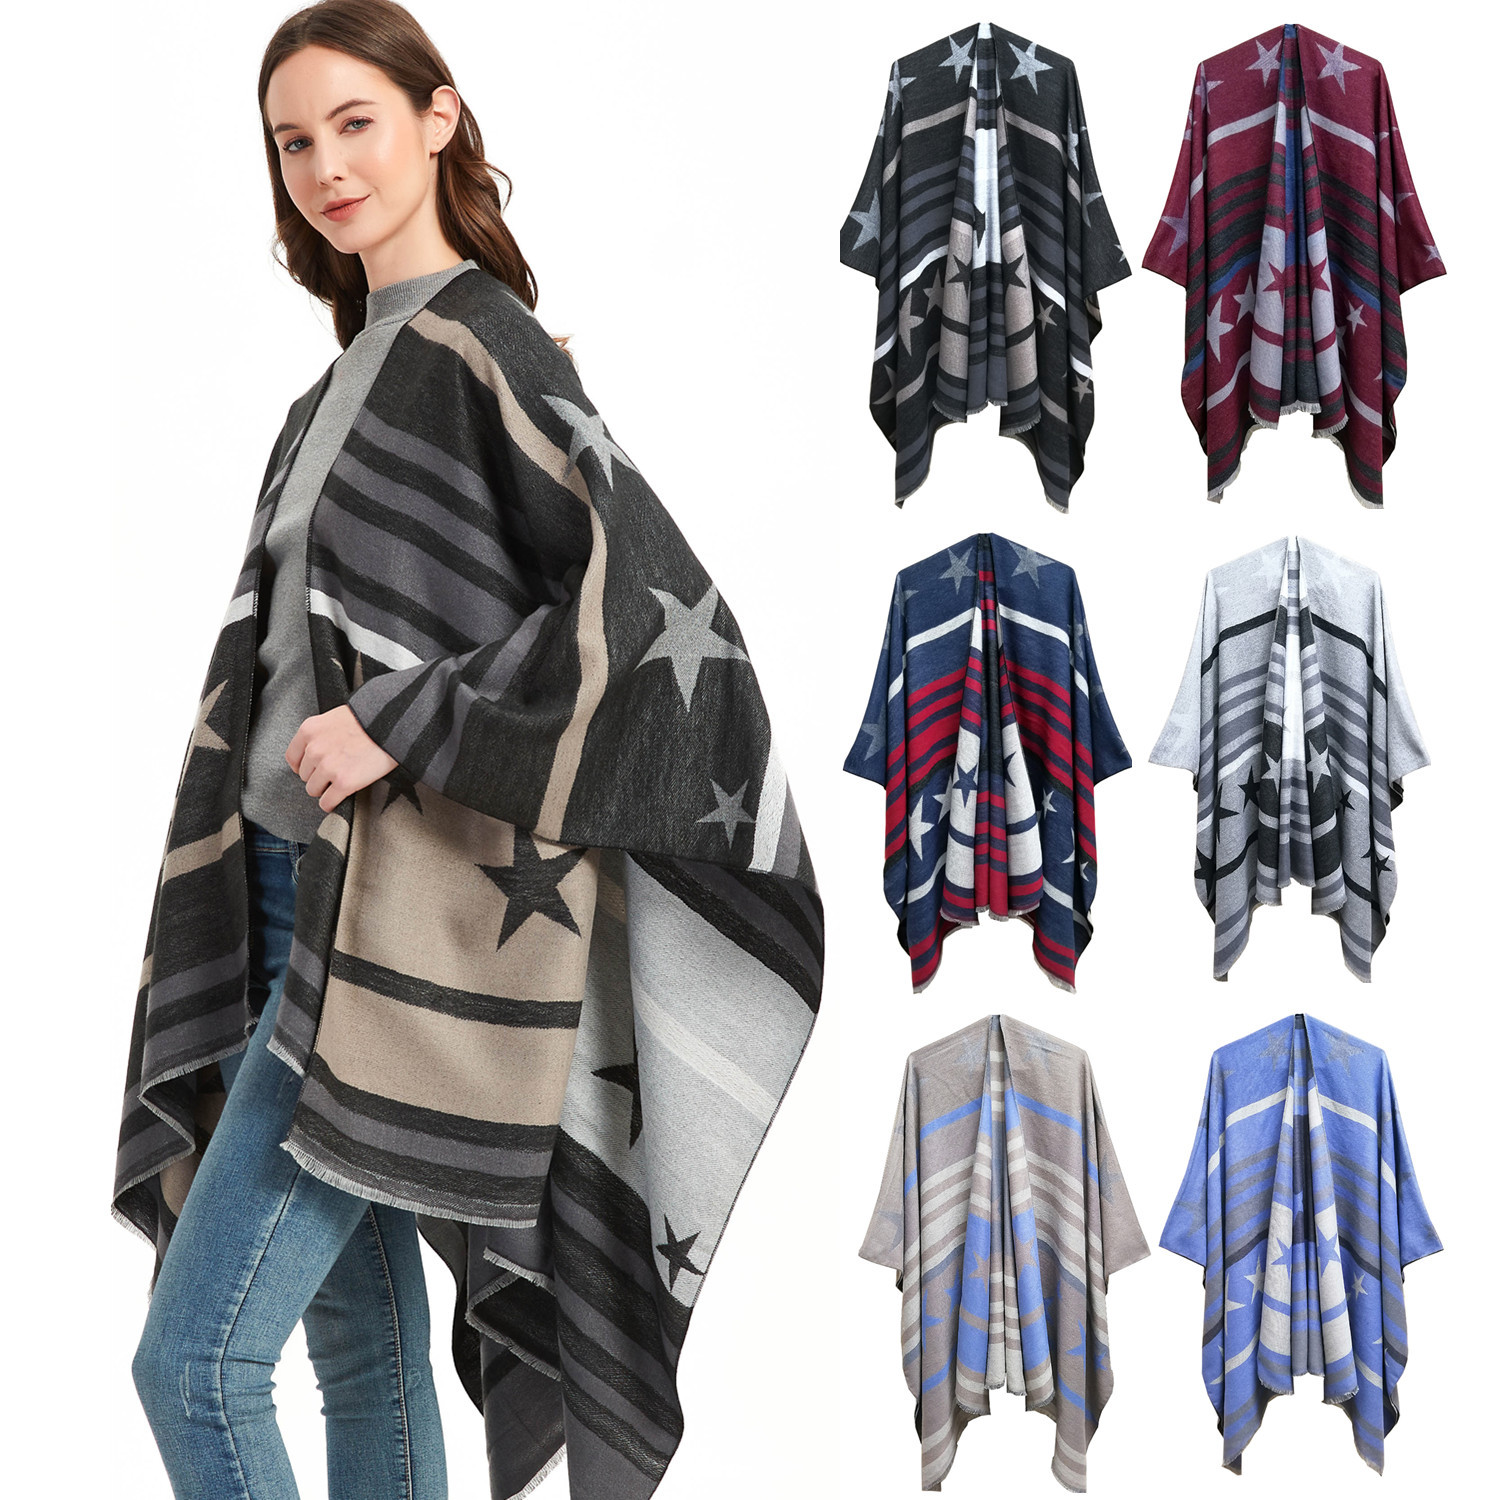 

Women Shawl Jacquard Slit Wraps Star Pattern Cappa Girls Home Shawls Indoor Air Conditioner Pashmina Cloak Spring And Autumn Fashion Scarves 23Colors WMQ1305, Mixed colors;random delivery